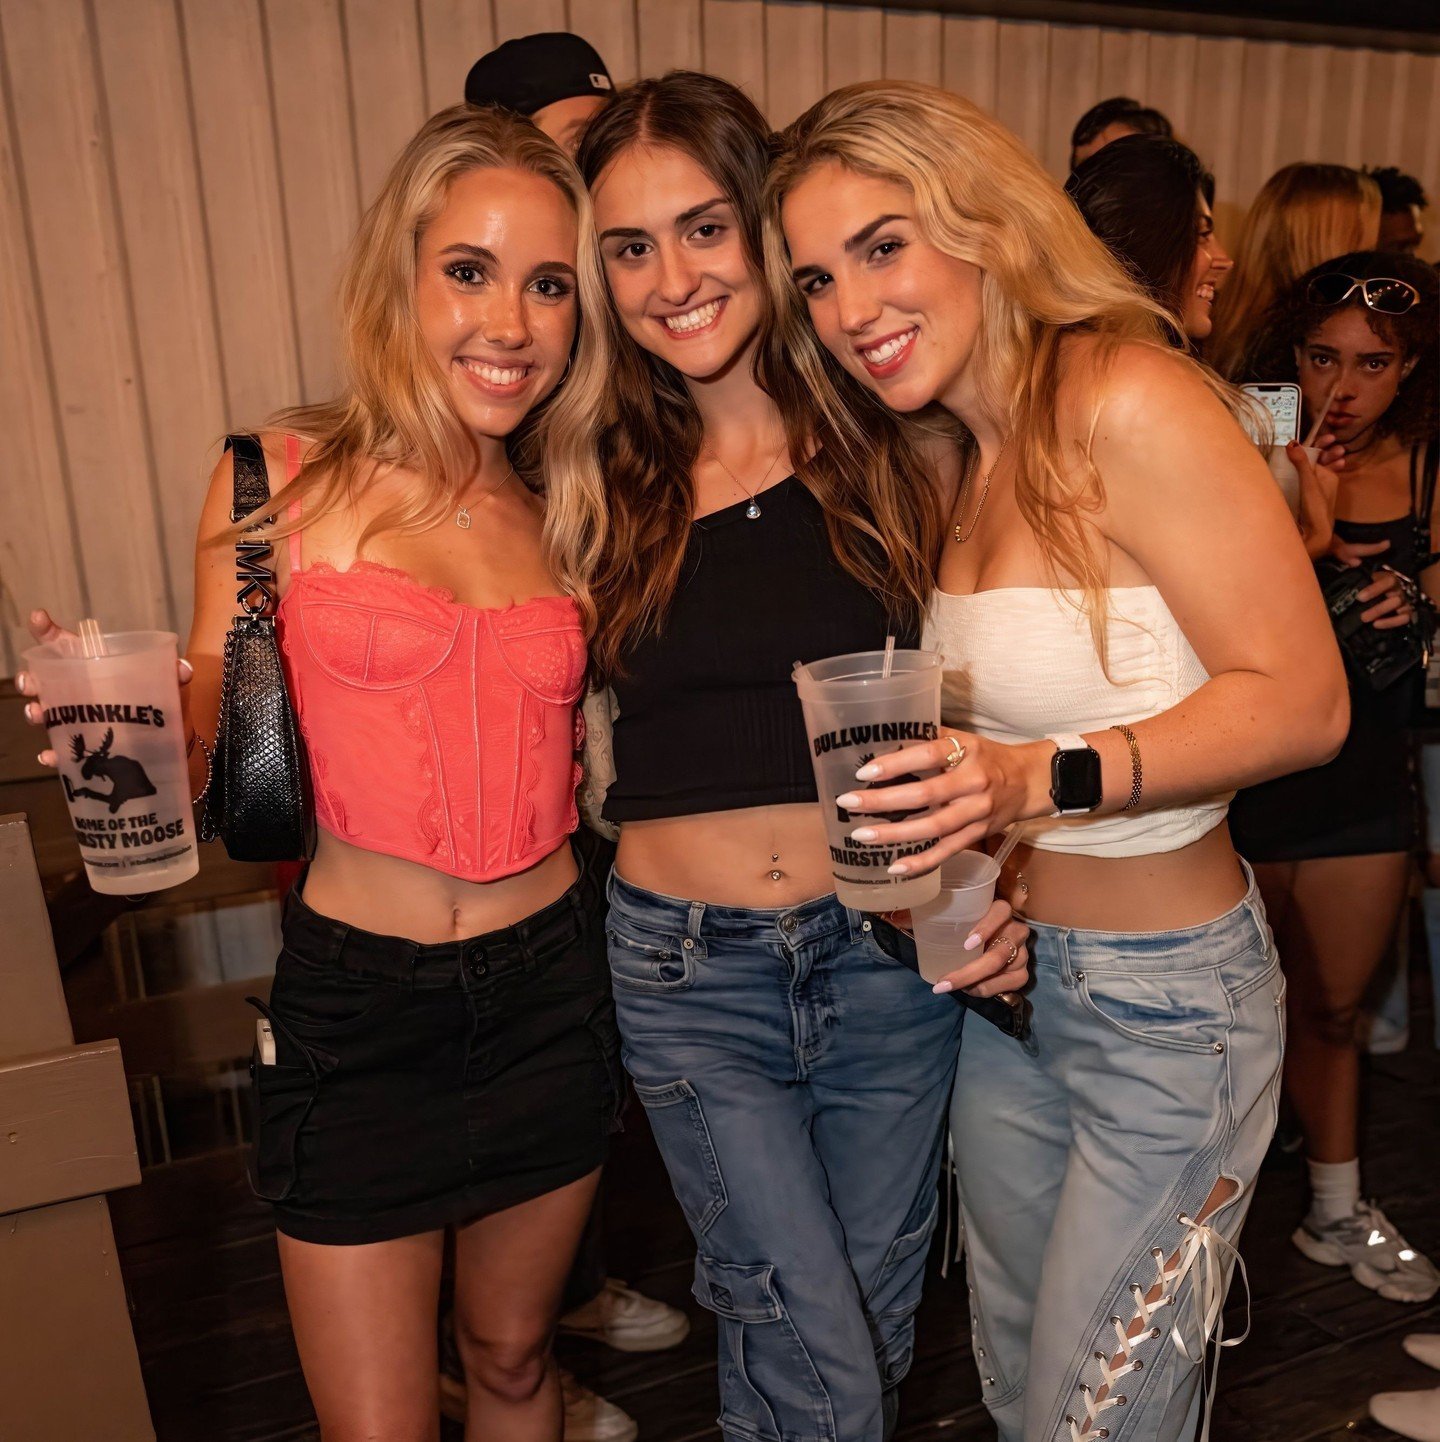 TBT to last week at Bulls Collegenight Thurs while looking forward to seeing all you graduates tonight! Open at 8pm running your favorite special as usual!⁠
⁠Full album on: facebook.com/thirstymoose⁠
Photo credz: @razor32308⁠
⁠
Always 21+⁠
#staythirs